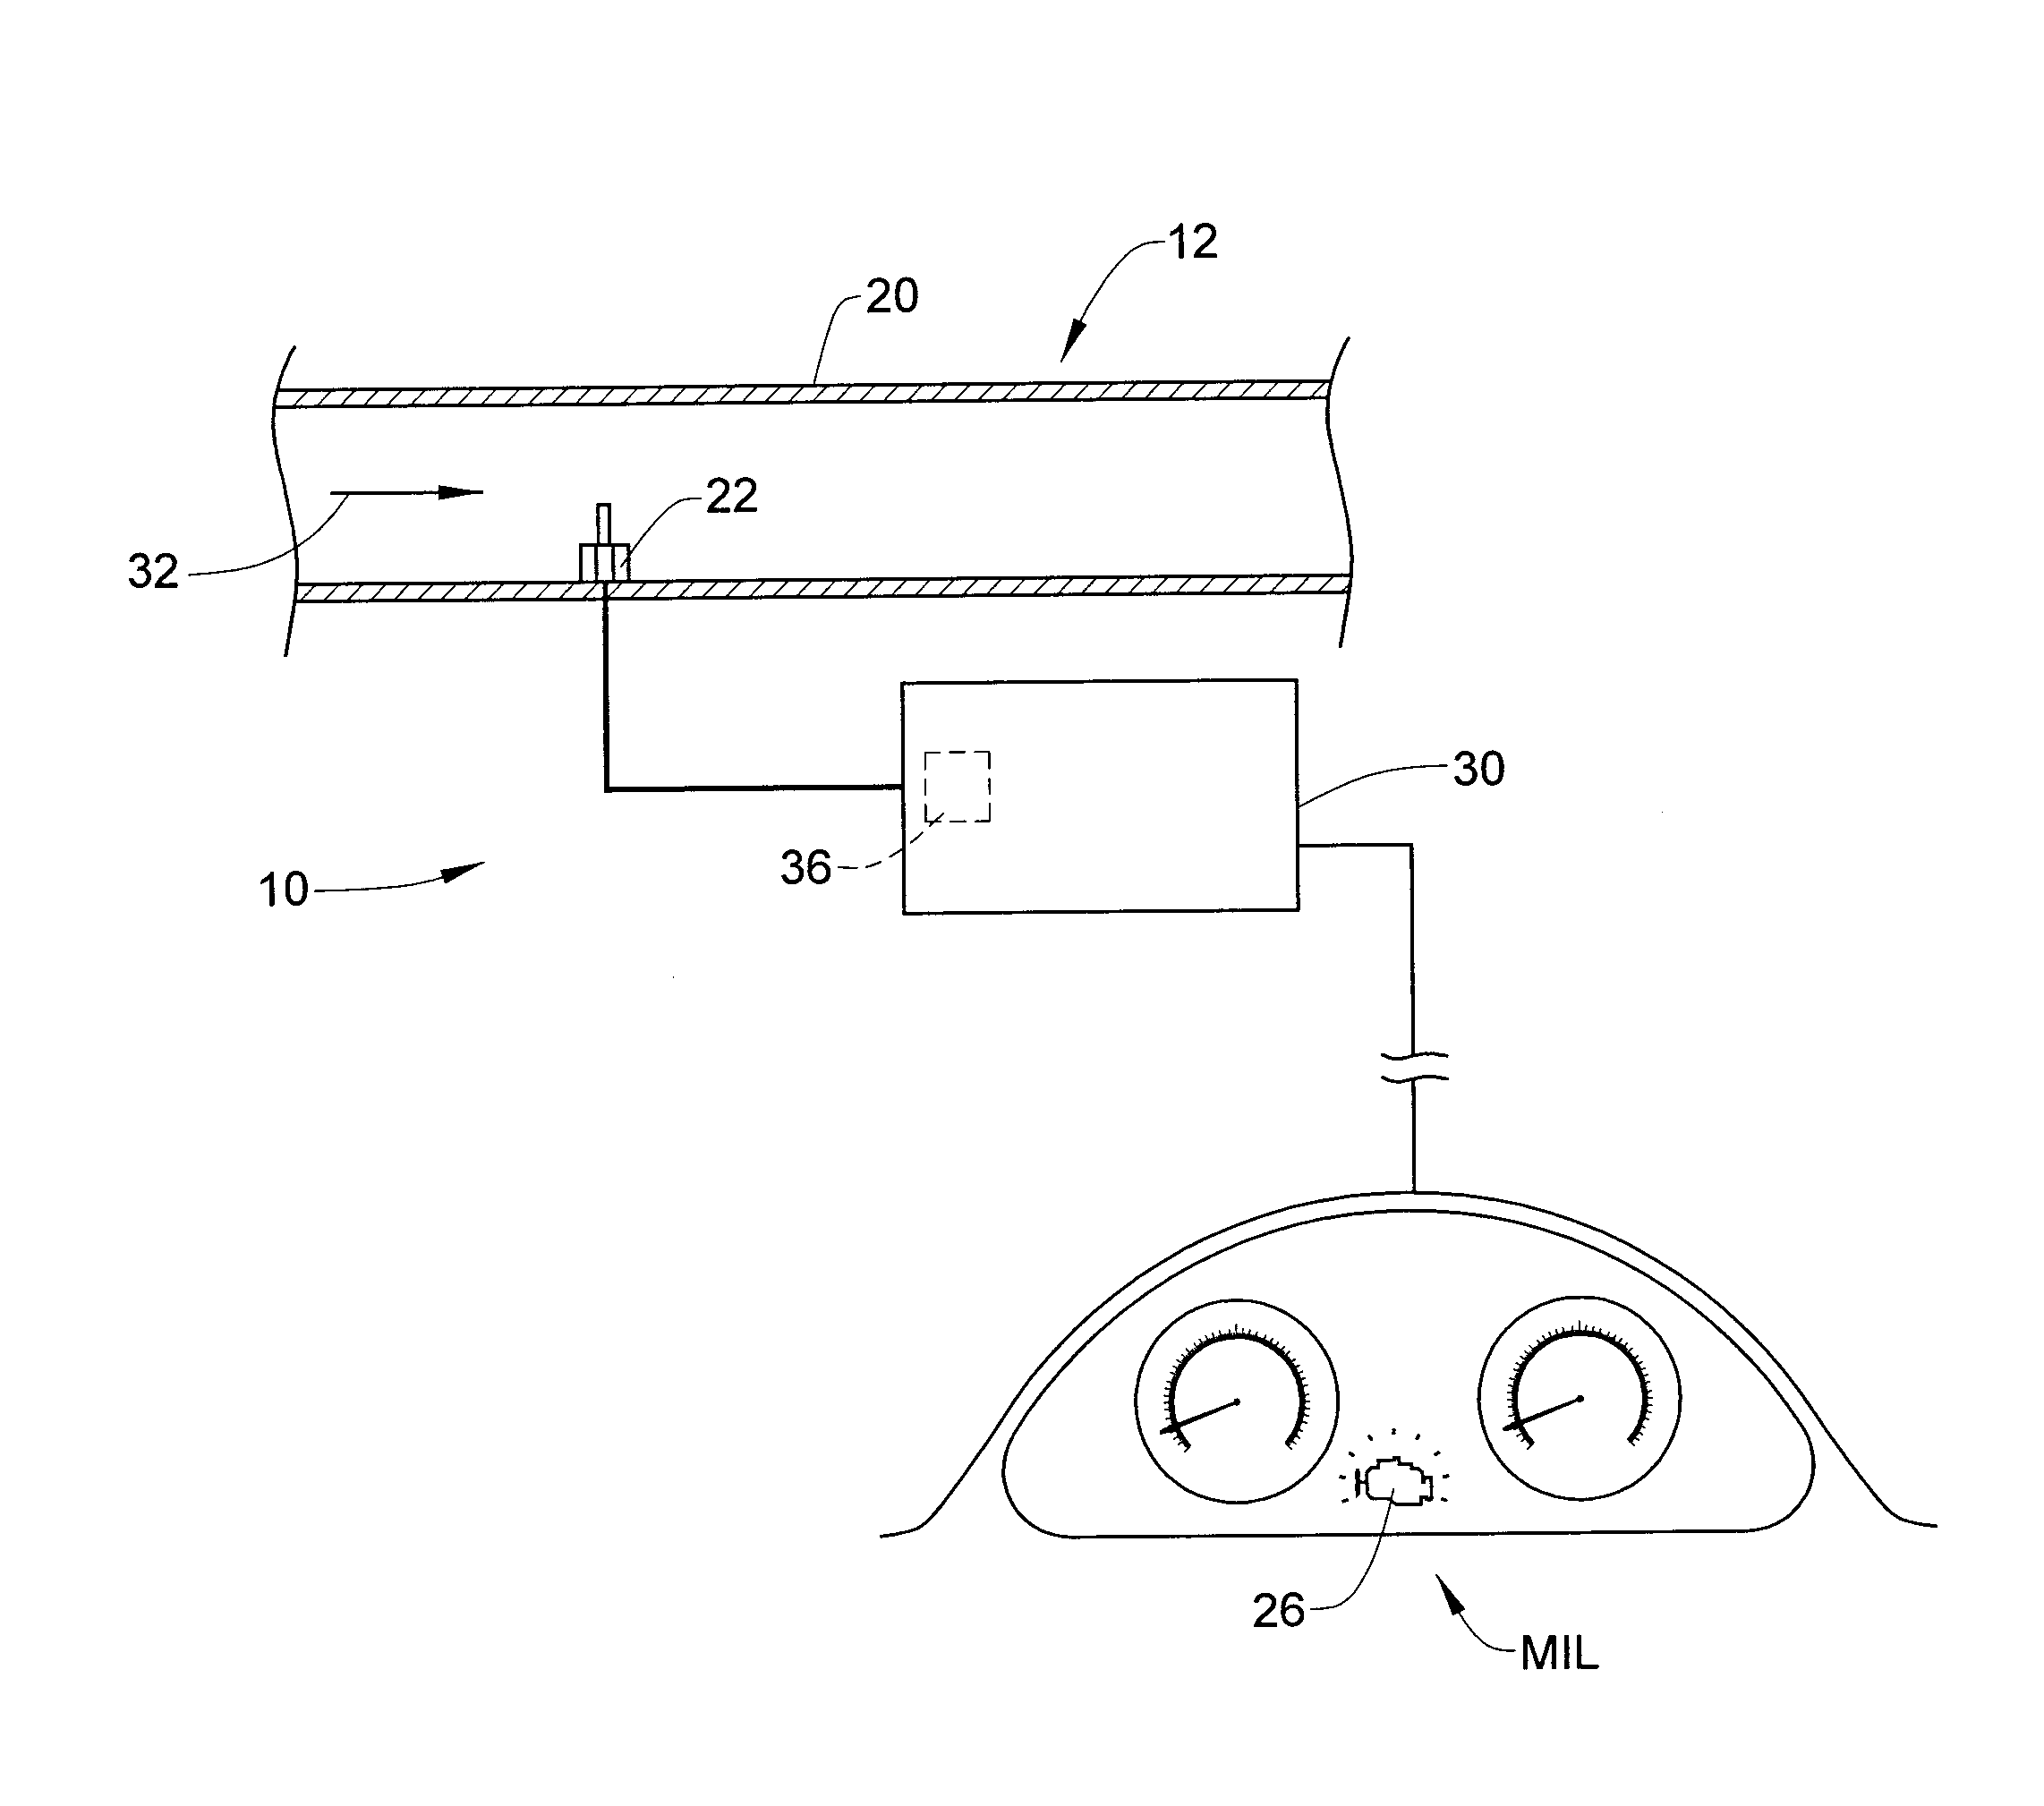 Exponentially weighted moving averaging filter with adjustable weighting factor